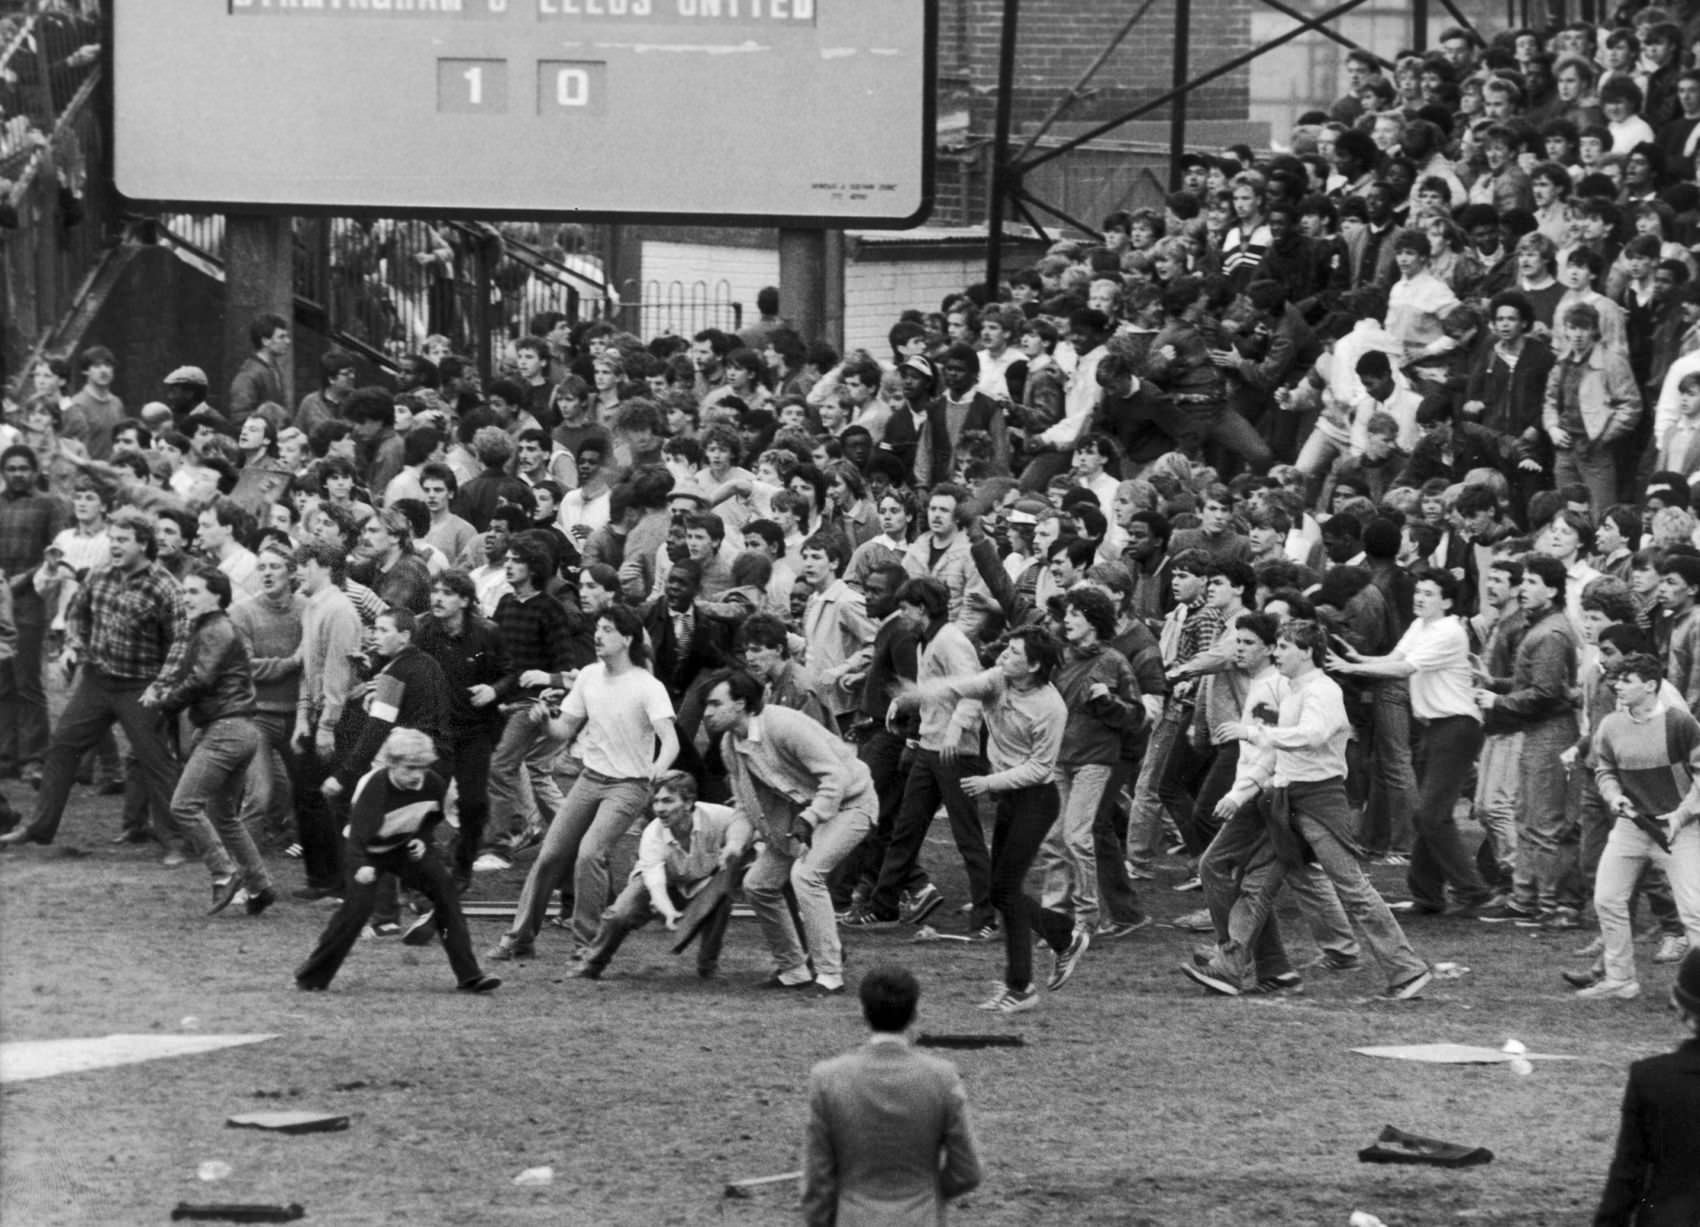 Football hooligans take over the pitch at St. Andrews during a game between Birmingham City and Leeds United in Birmingham, England in 1985.